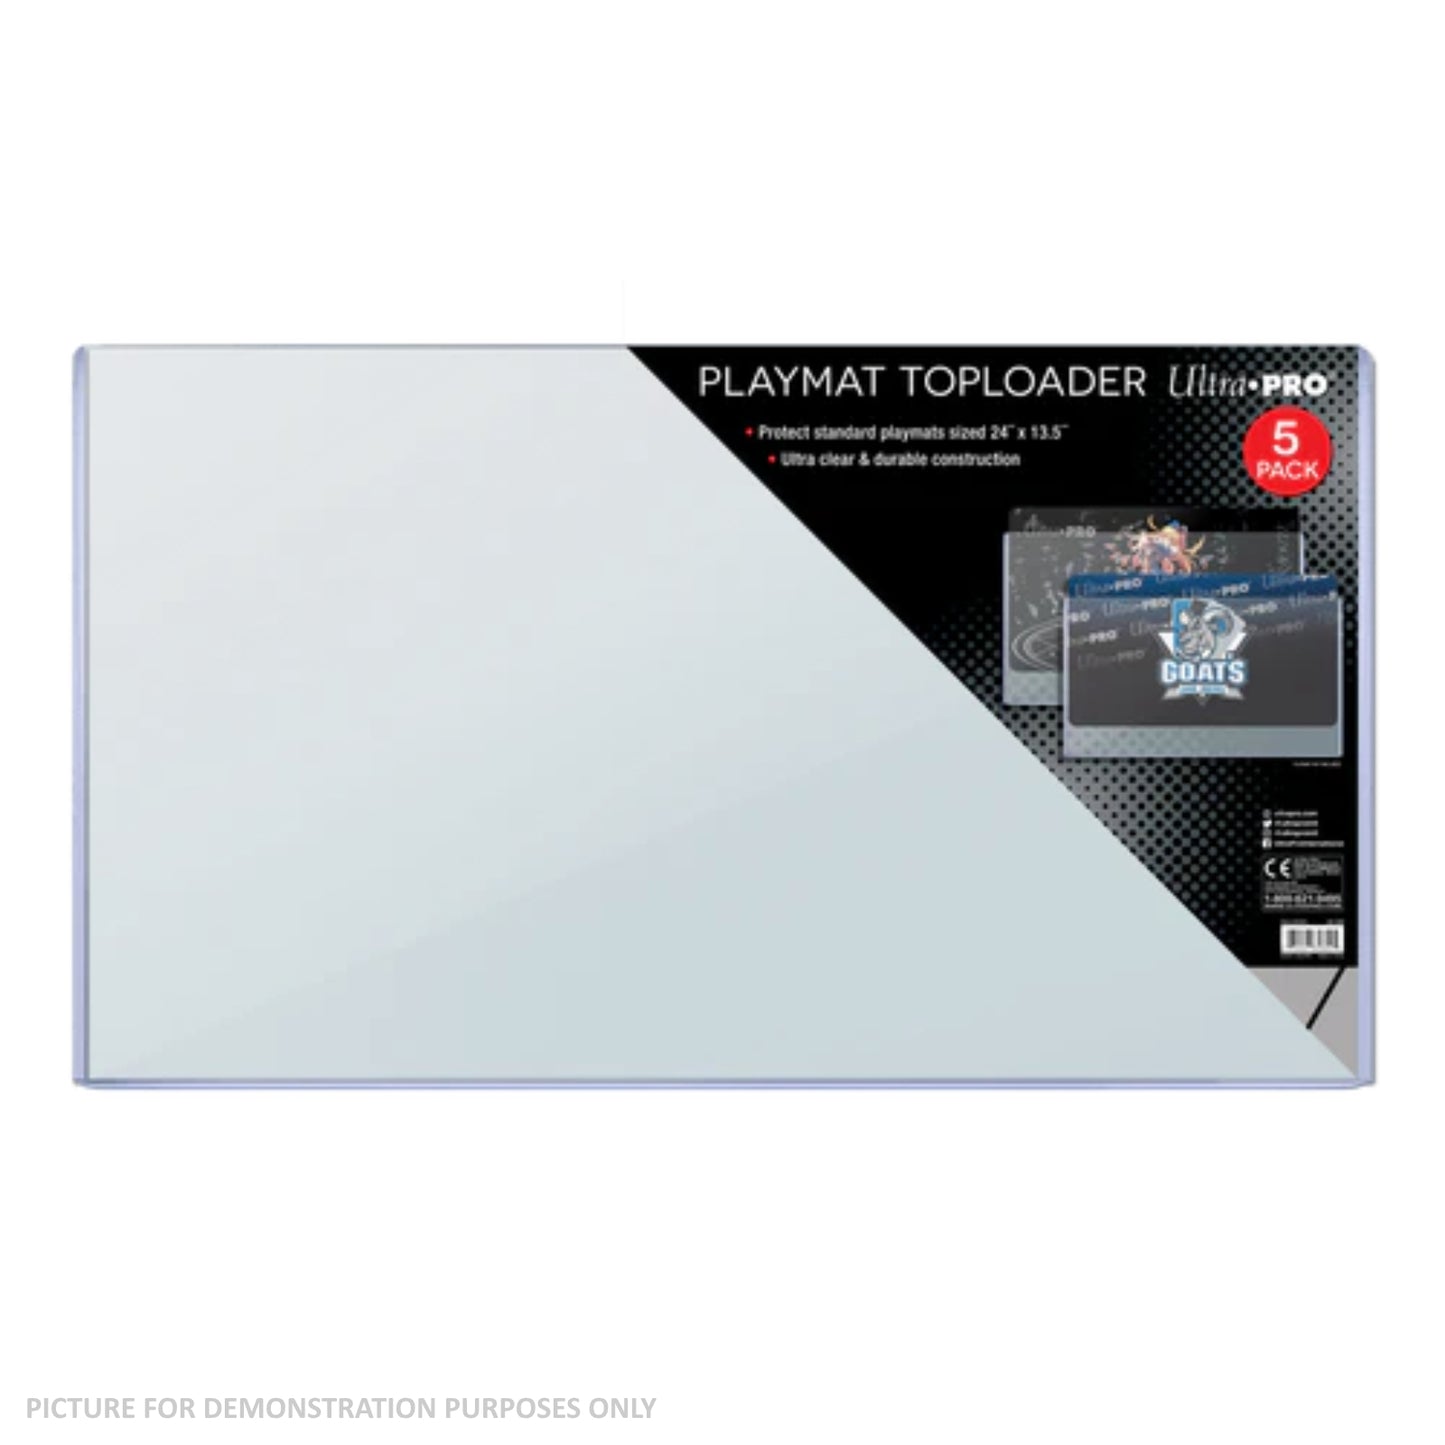 Ultra Pro Playmat Toploaders 24" x 13.5" - PACK OF 5